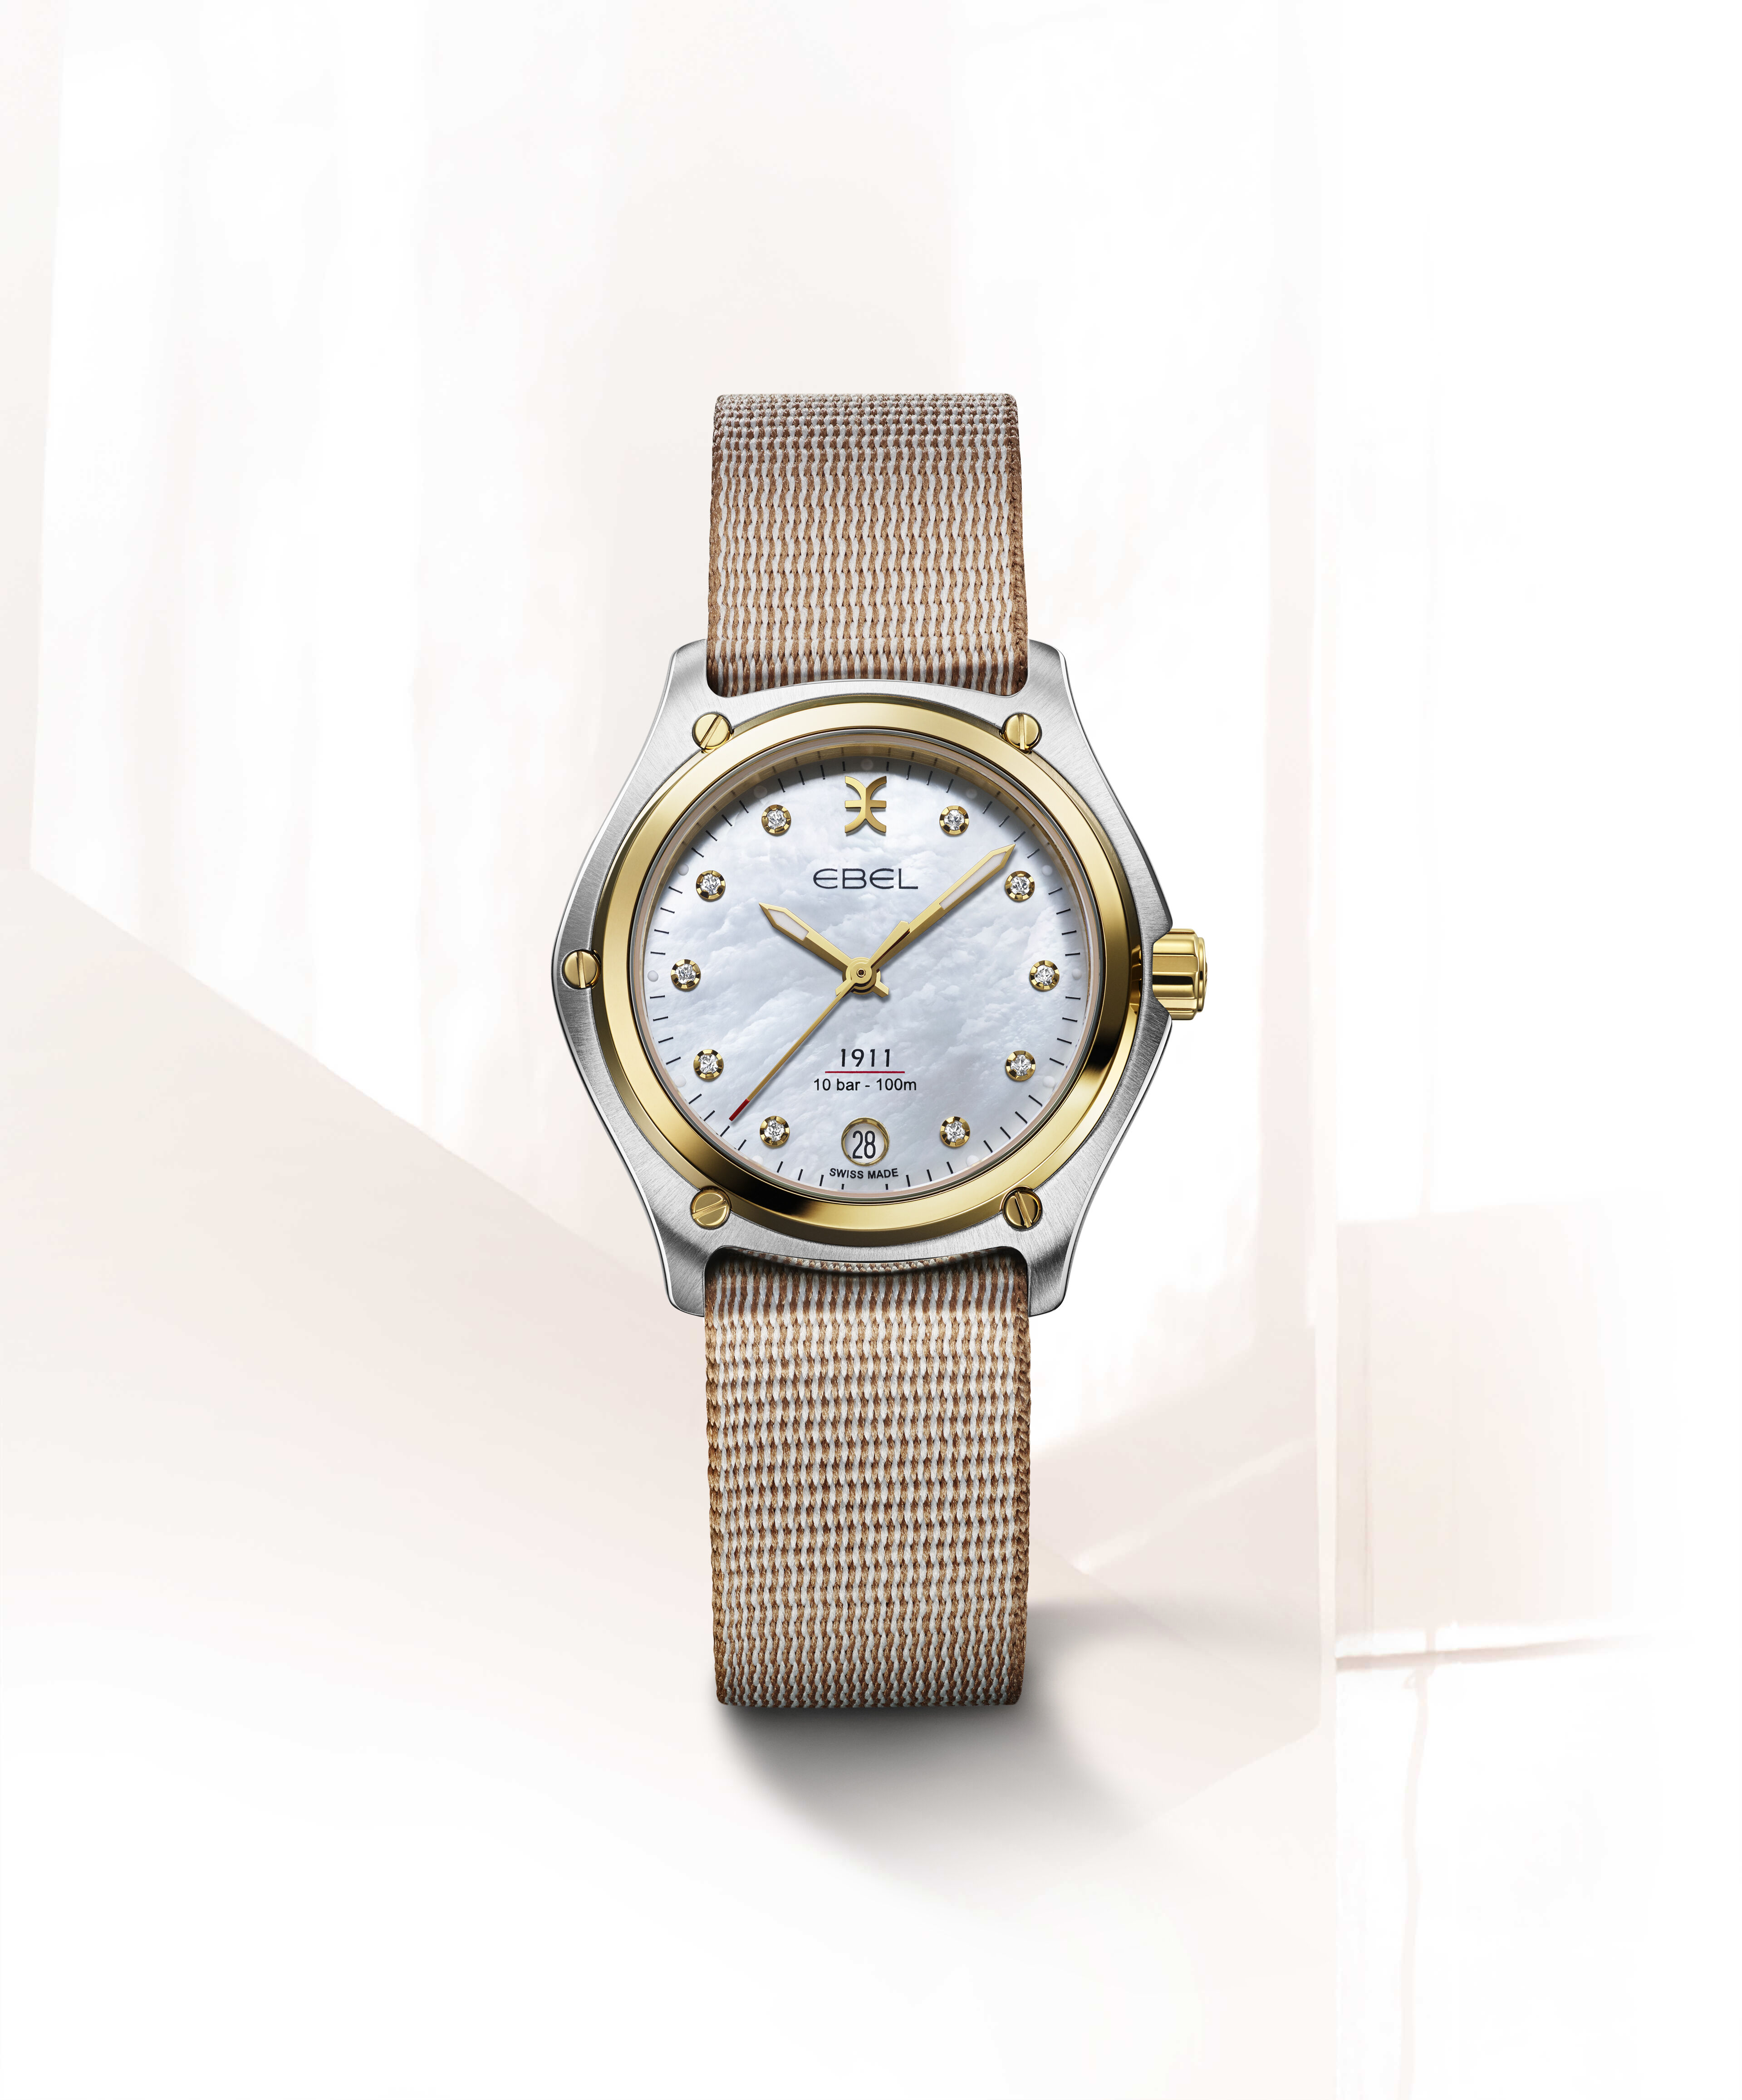 EBEL | Women's Watch EBEL 1911, Stainless steel and 18K yellow gold